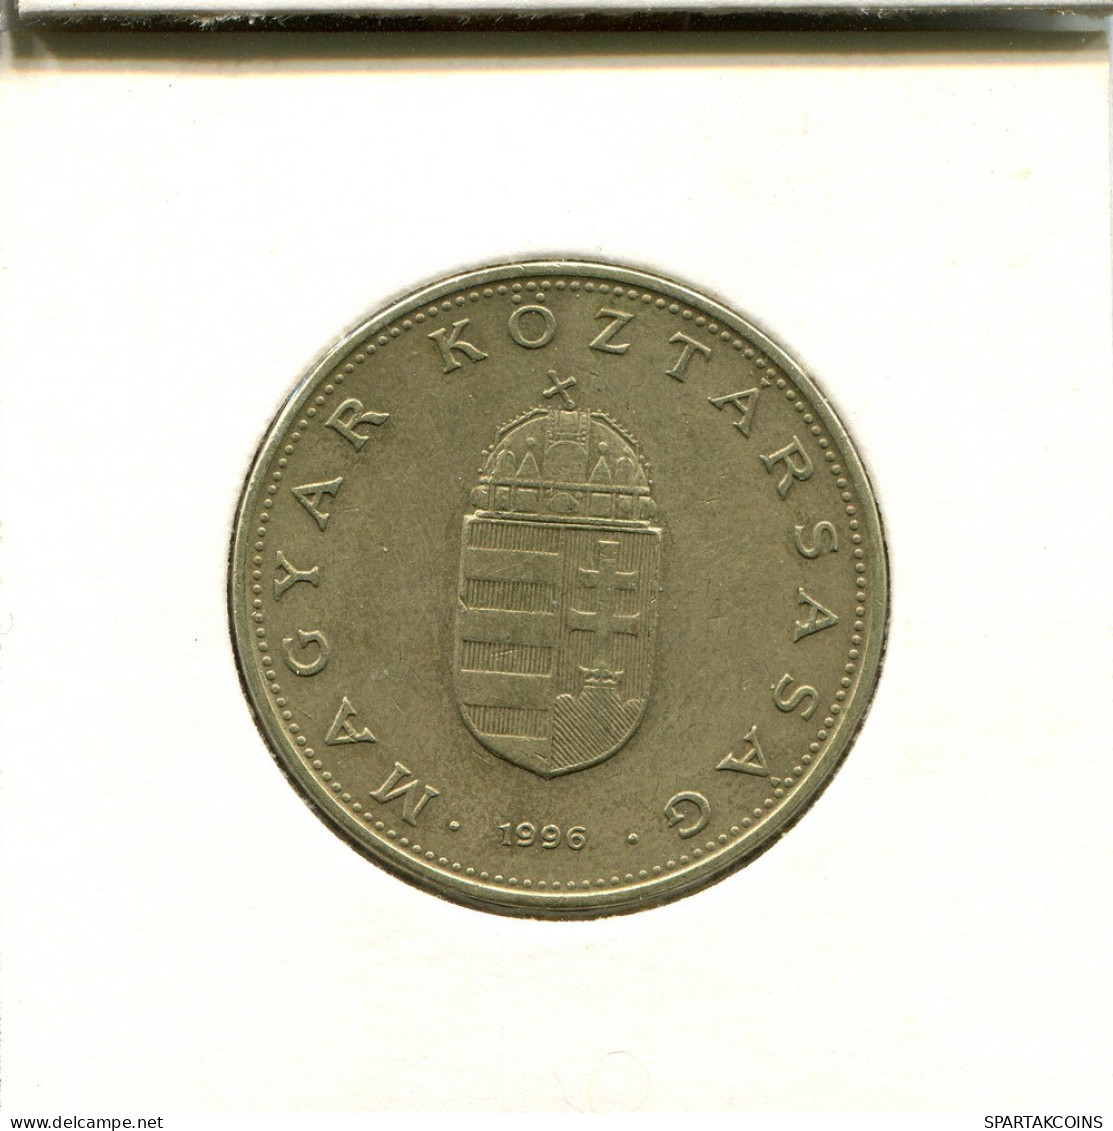 100 FORINT 1996 HUNGARY Coin #AS916.U.A - Ungheria